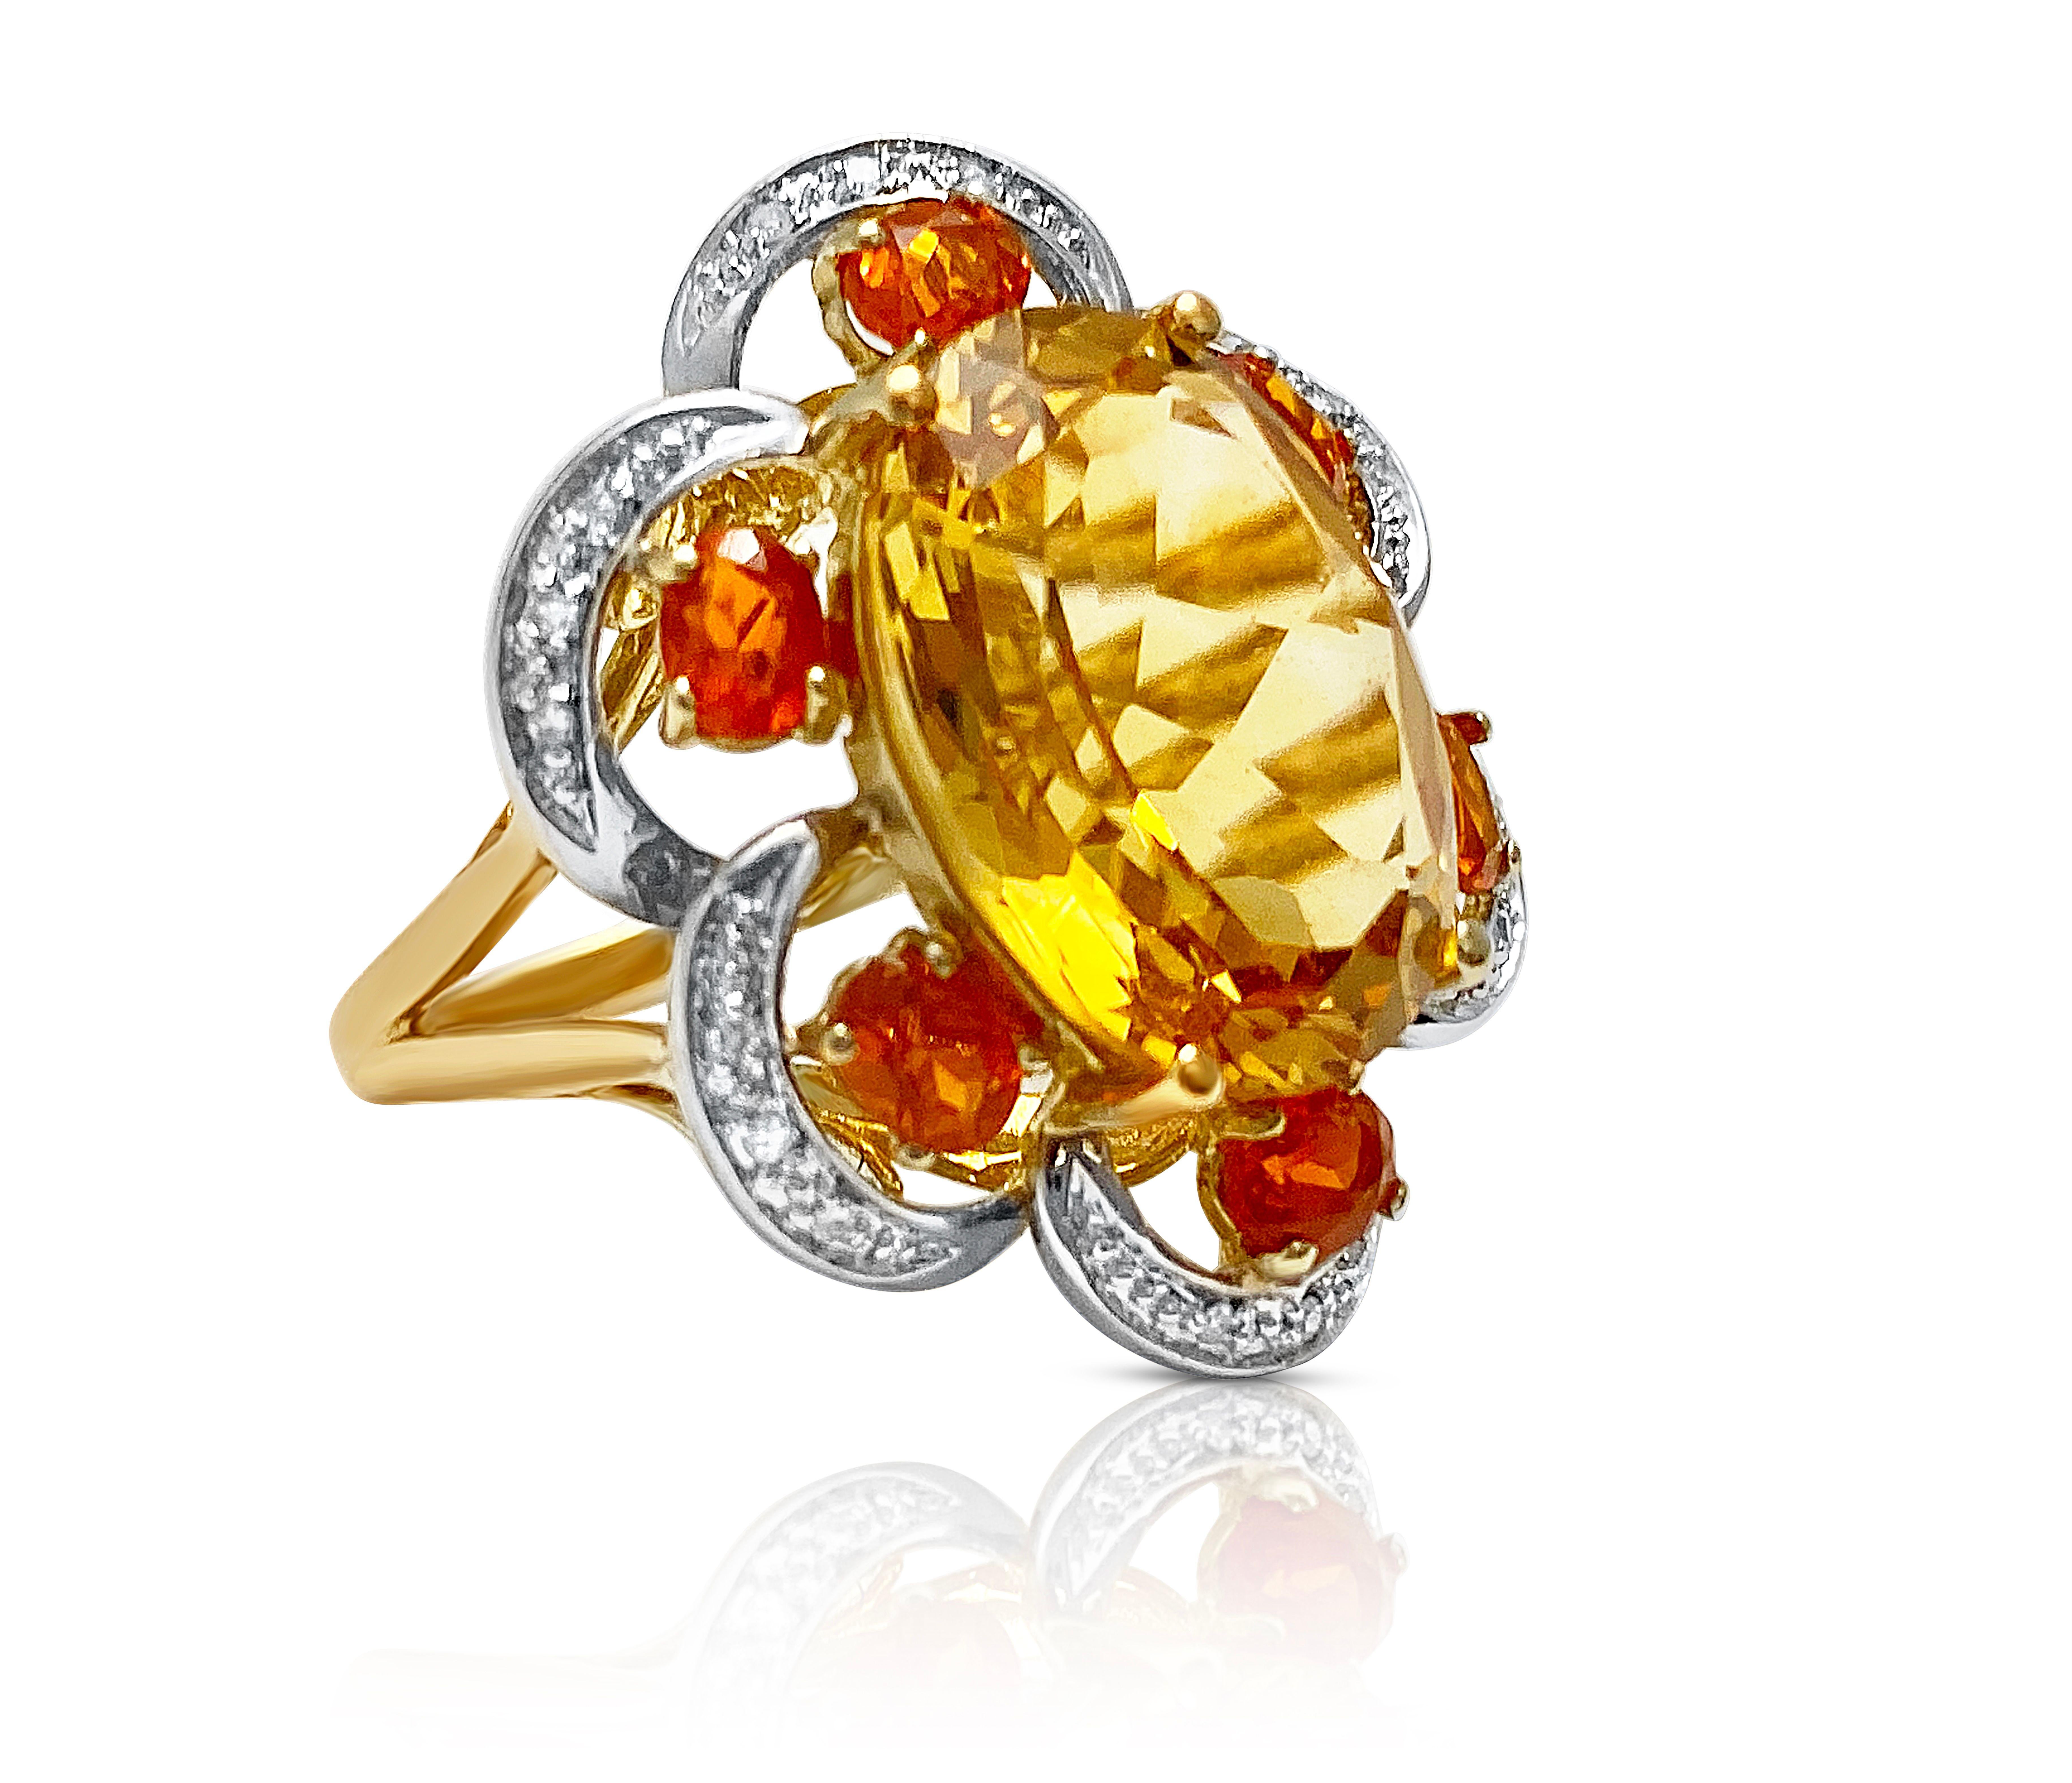 Centering an approximately ~7 carat Orangy-Yellow Oval-Cut Citrine, set in 14K Yellow/White Gold, and accented by six oval-cut orange Citrines and 30 round-brilliant cut diamonds

Details:
✔ Stone: Citrine 
✔ Stone Cut: Oval, Brilliant
✔ Stone